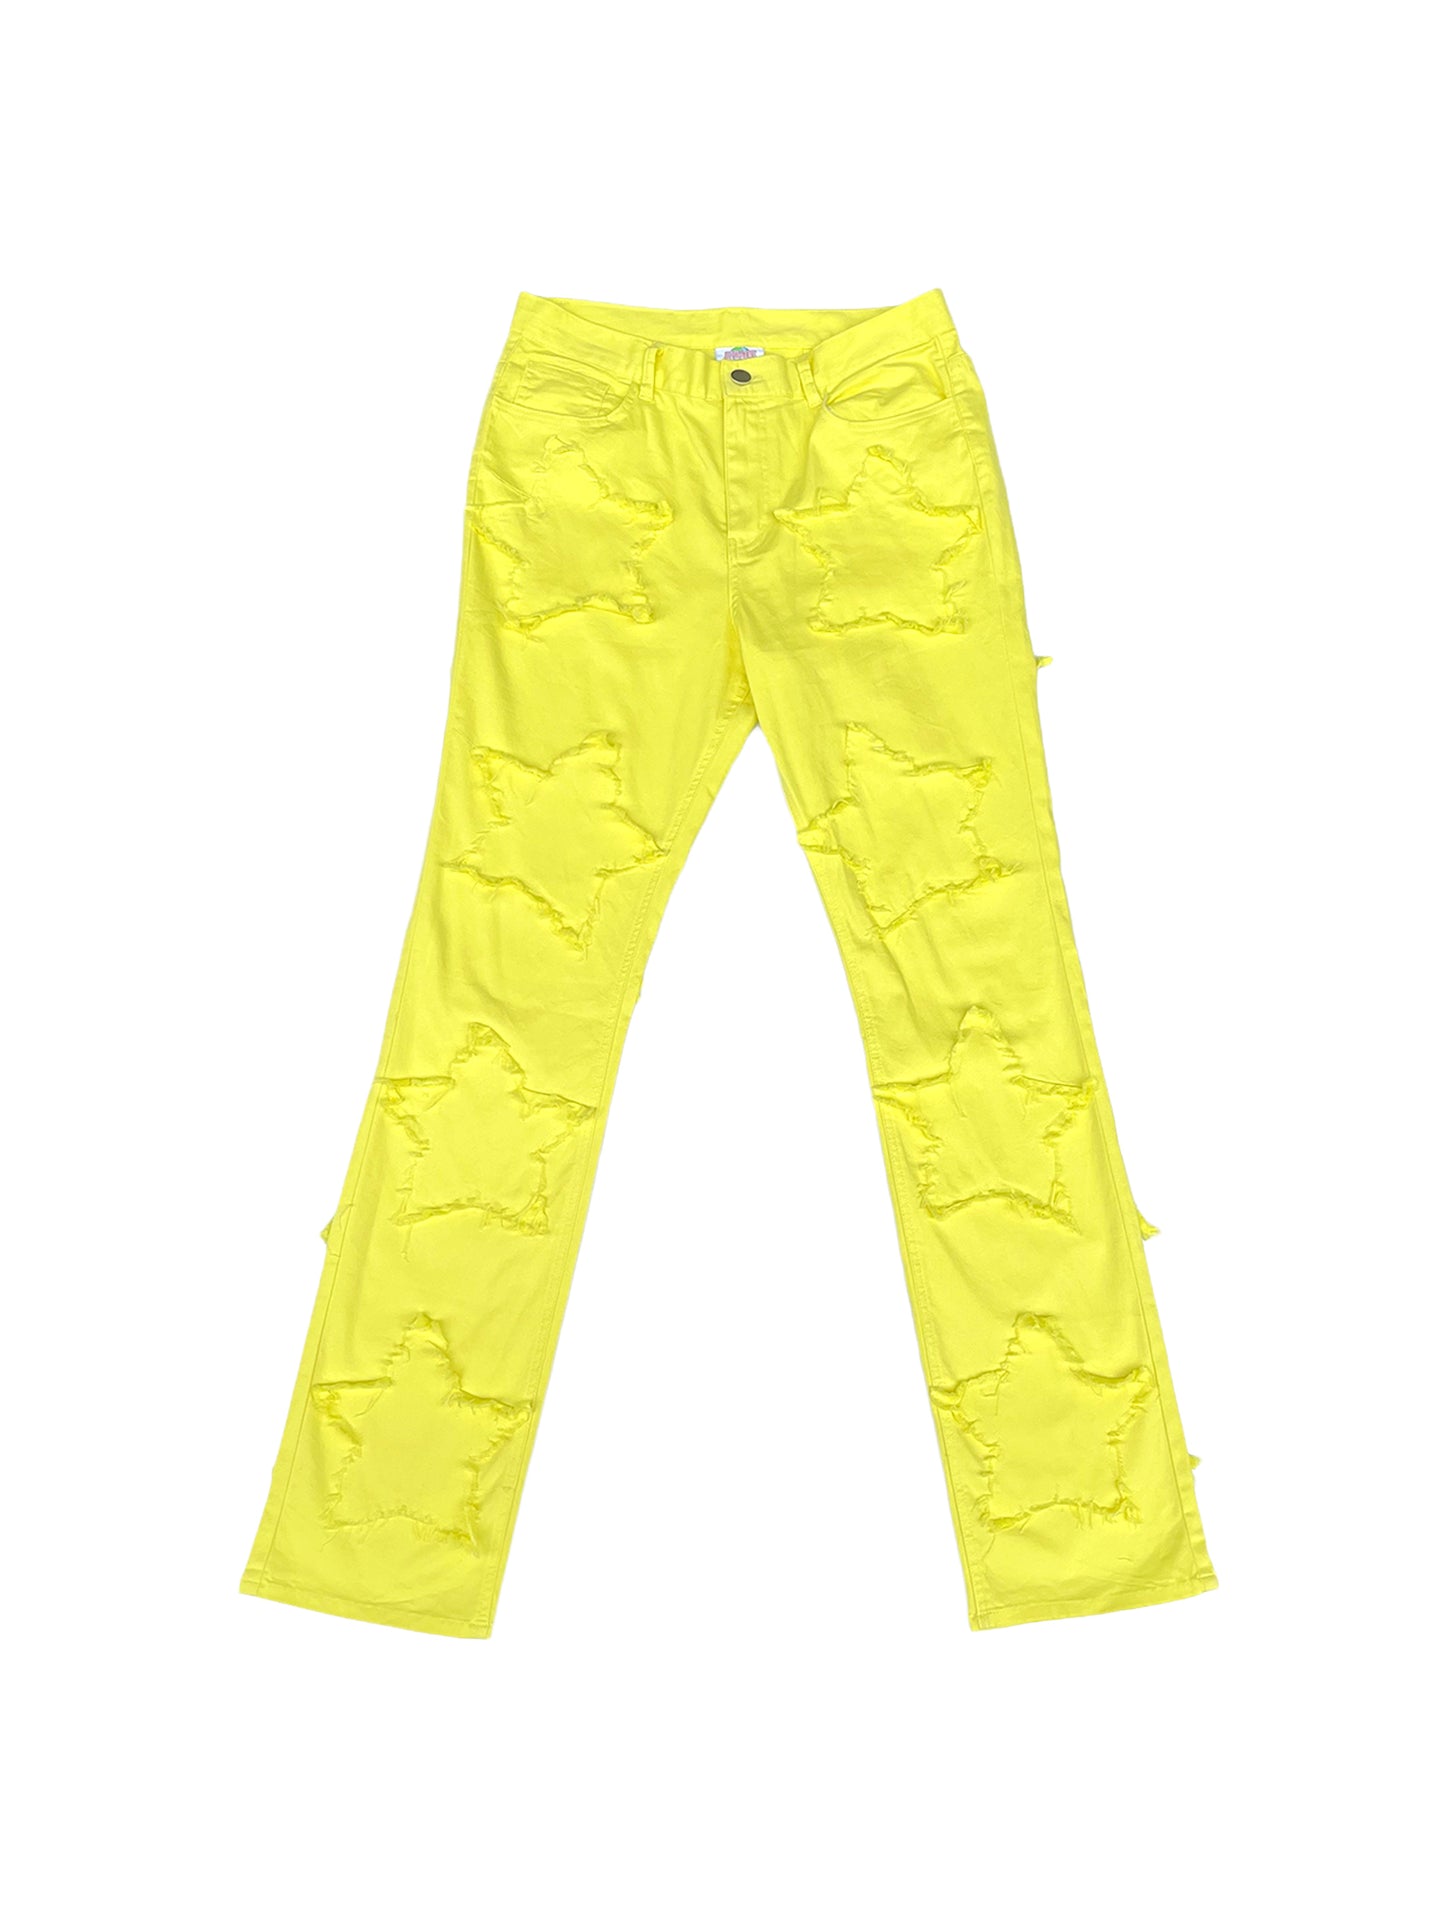 AONE4SURE Yellow Stars Jeans